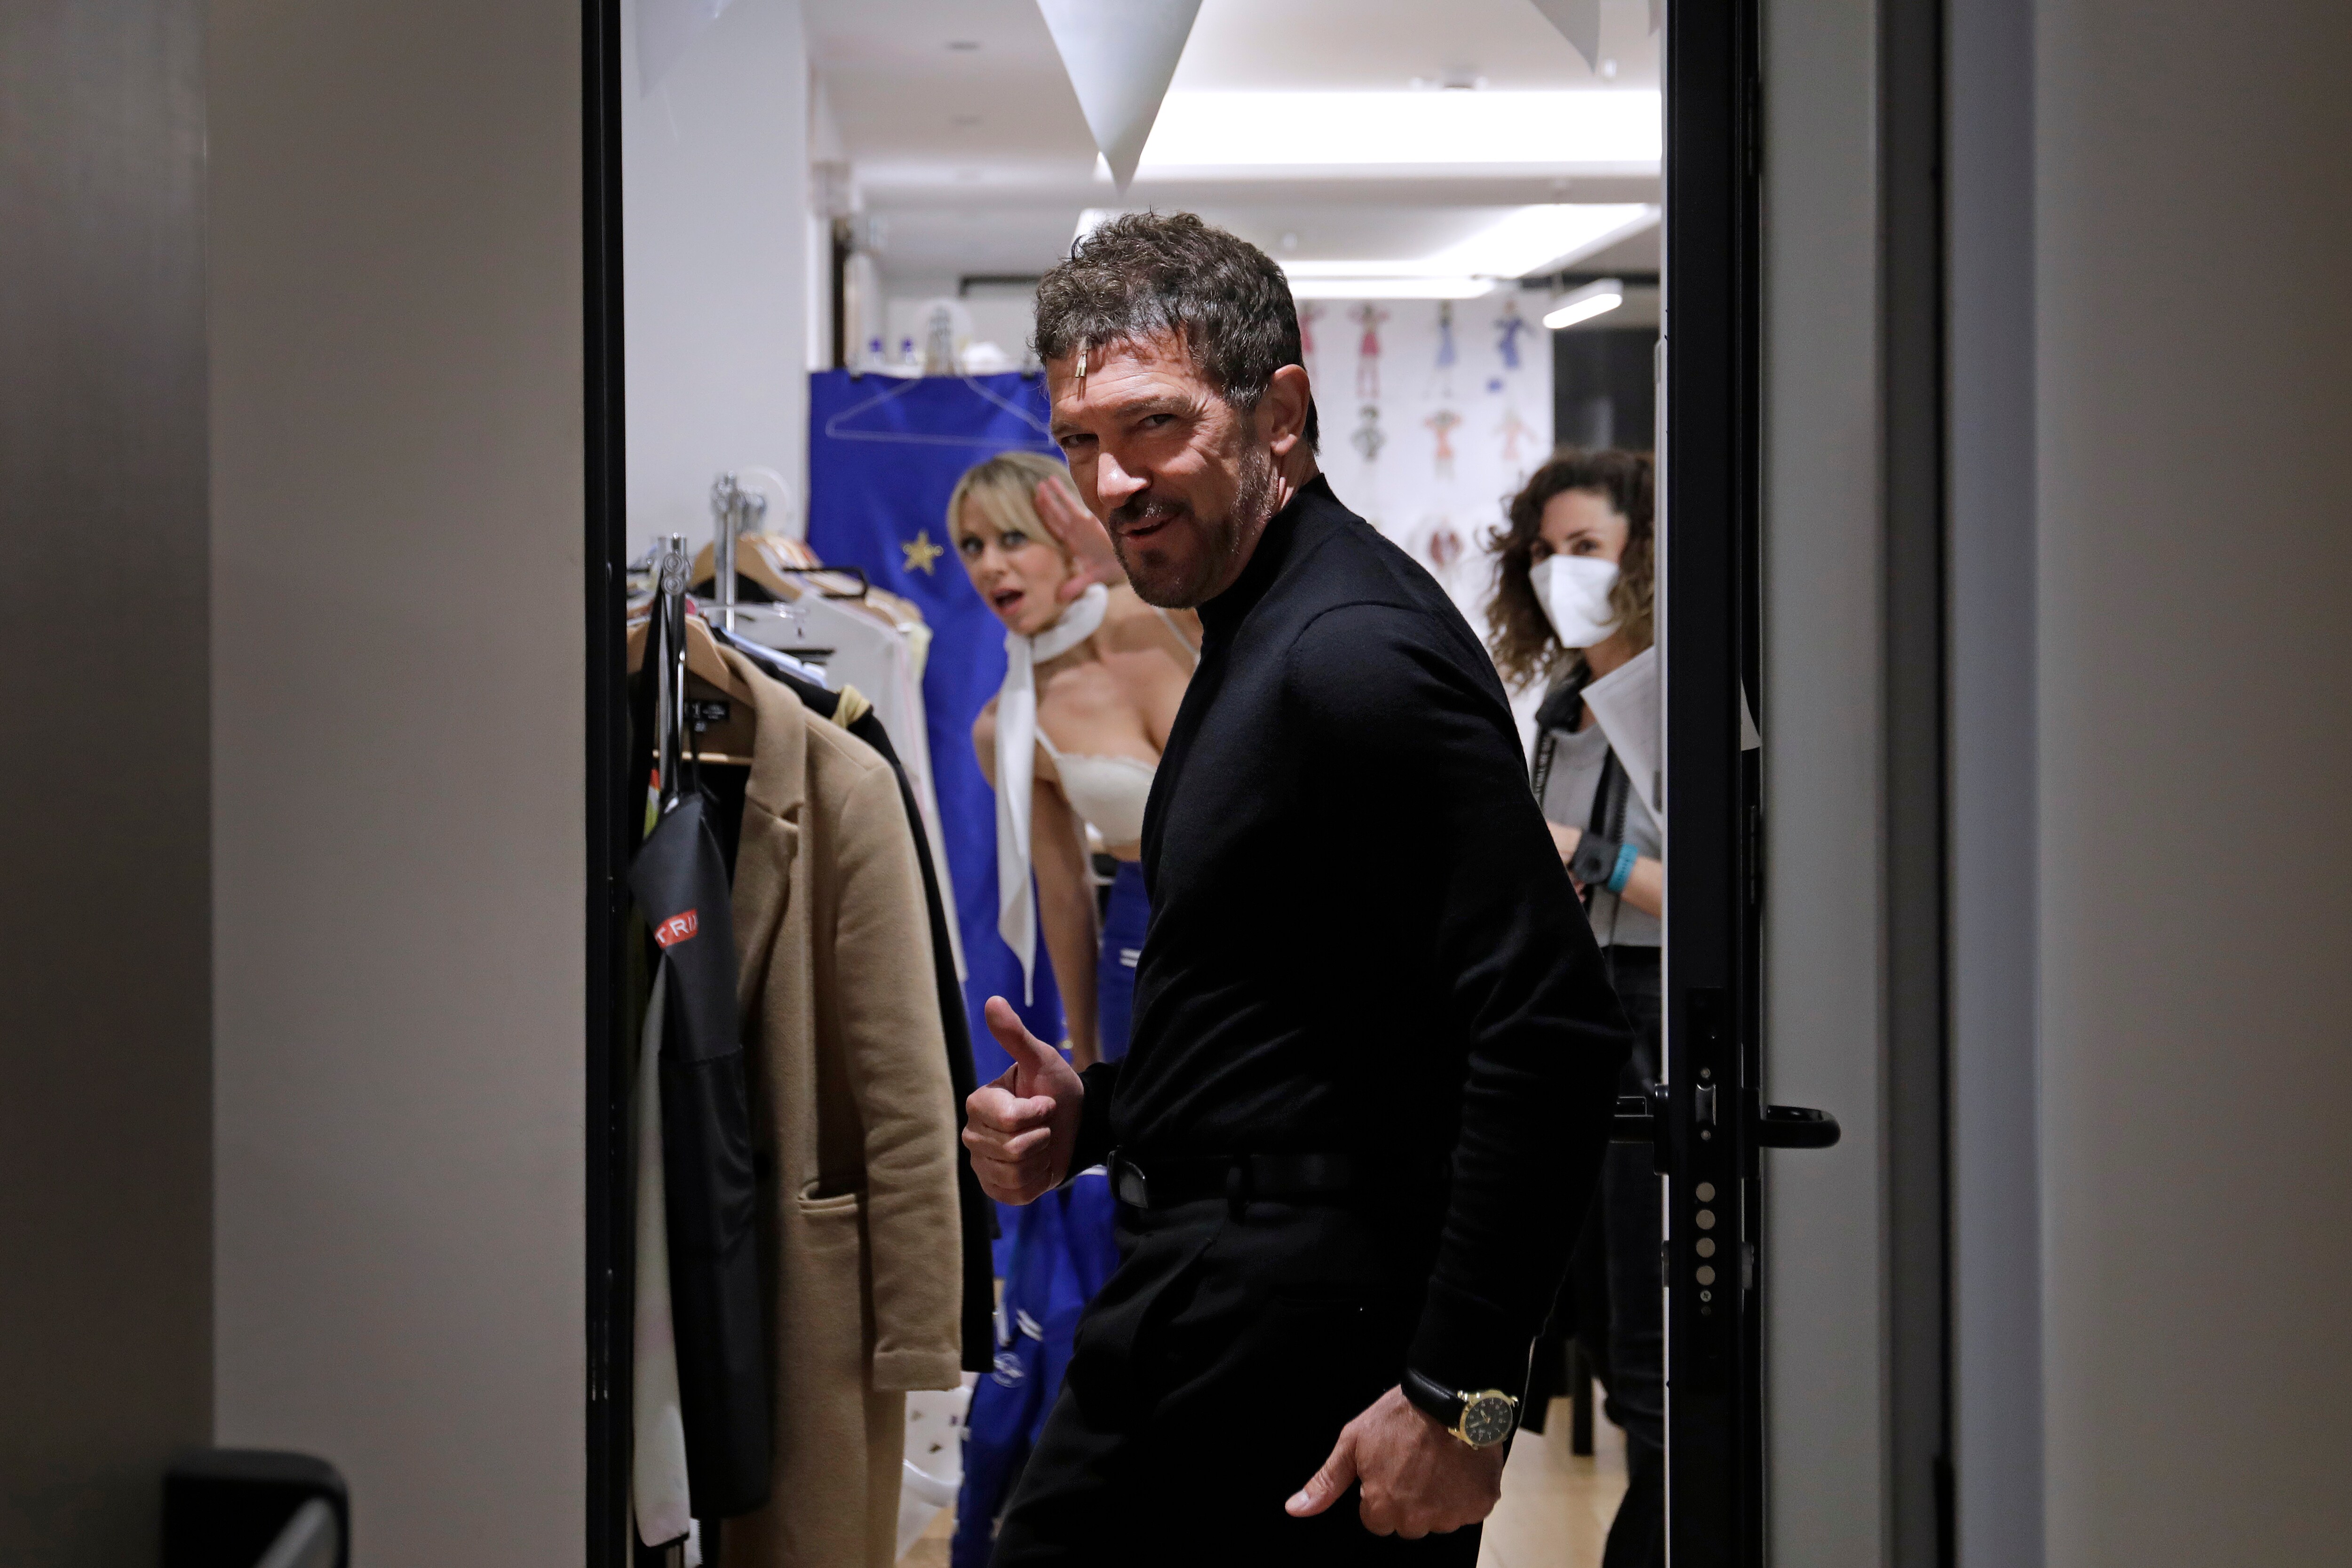 Behind the scenes at the Soho theatre as Antonio Banderas and the cast of Company prepare for a show.